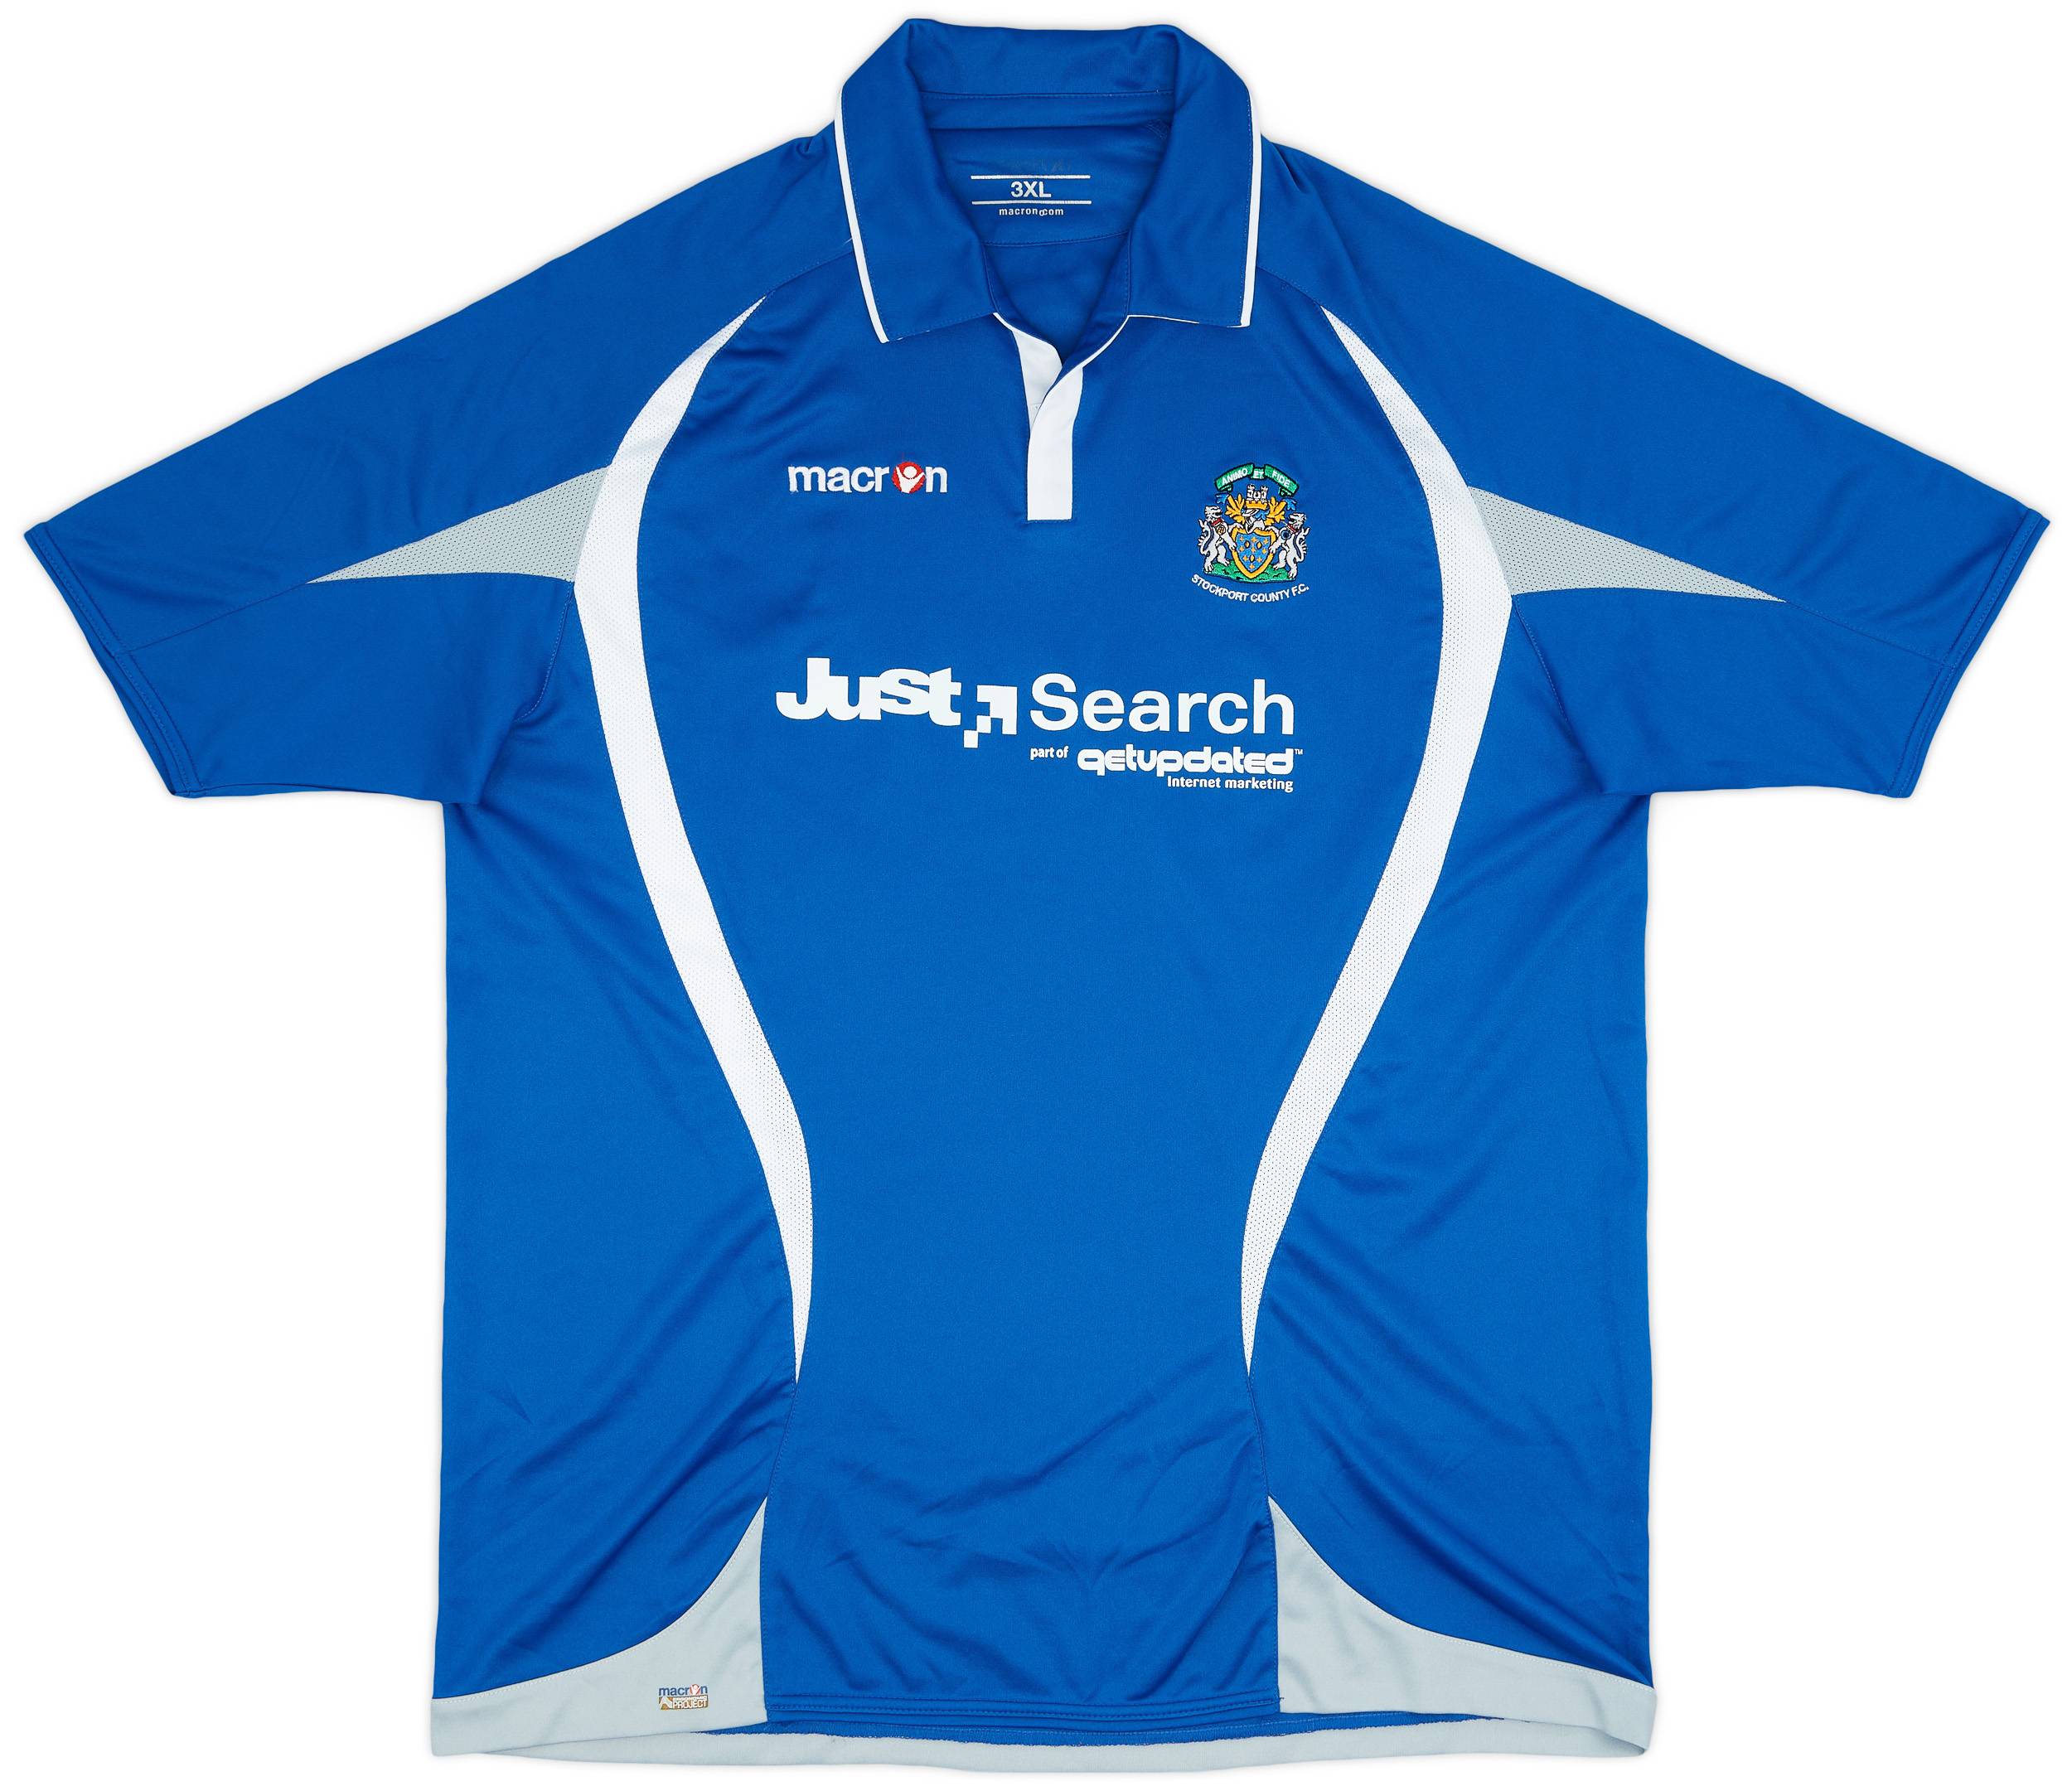 2009-10 Stockport County Home Shirt - 9/10 - (3XL)